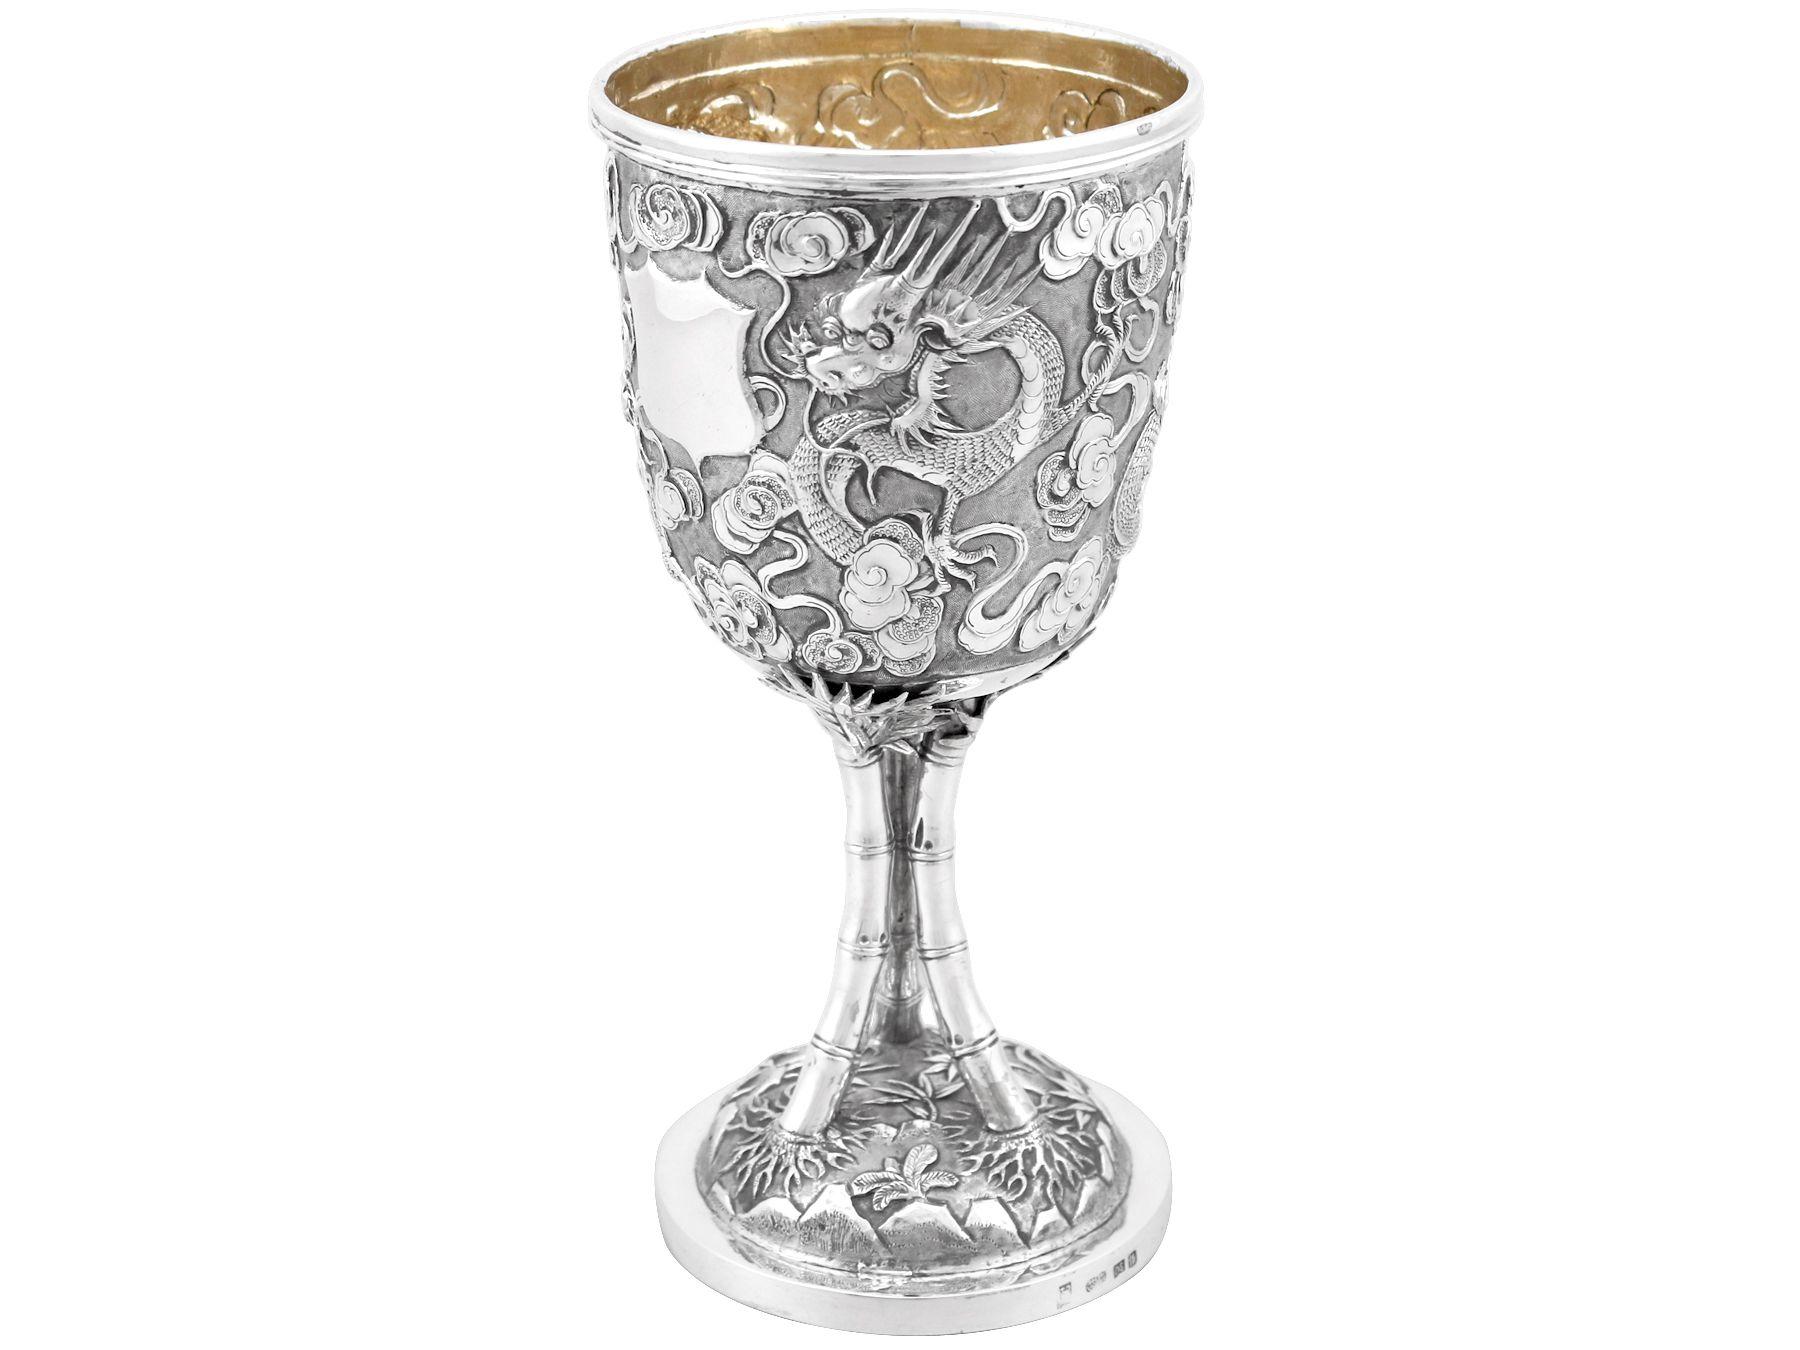 Antique Chinese Export Silver Goblet, circa 1900 In Excellent Condition For Sale In Jesmond, Newcastle Upon Tyne